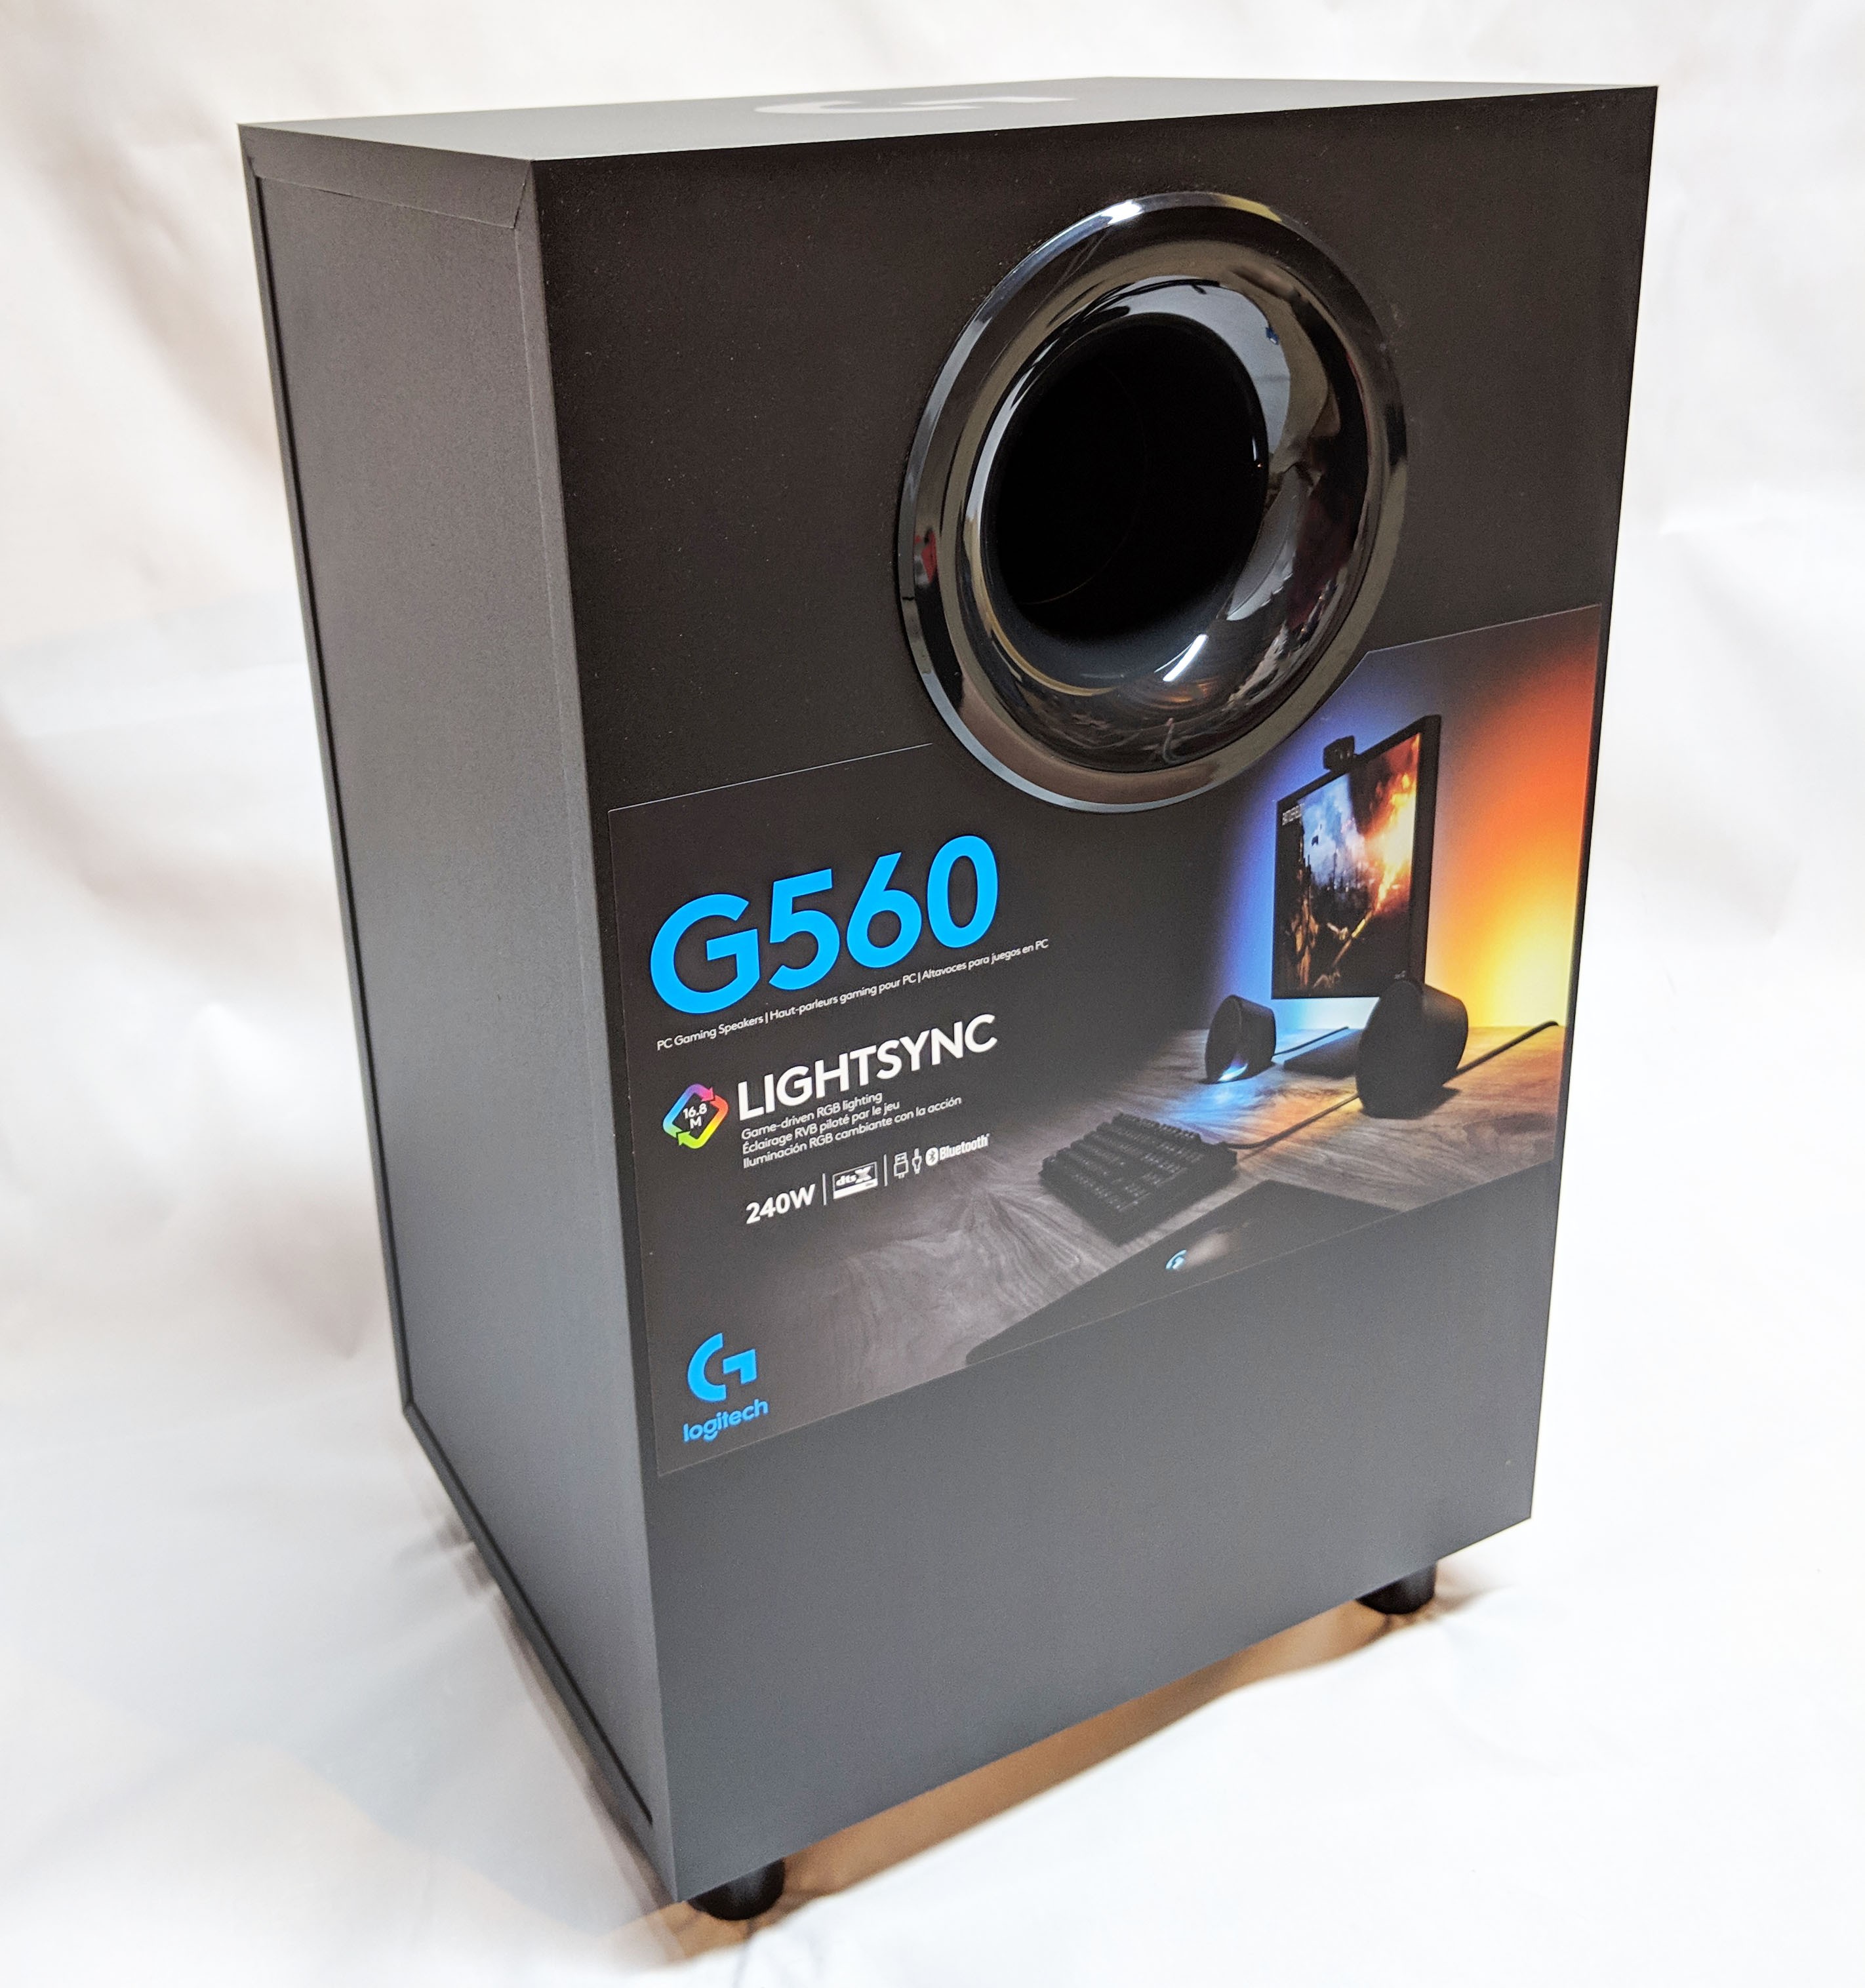 Logitech G560 Unboxing & Complete Setup - BEST PC GAMING SPEAKERS 